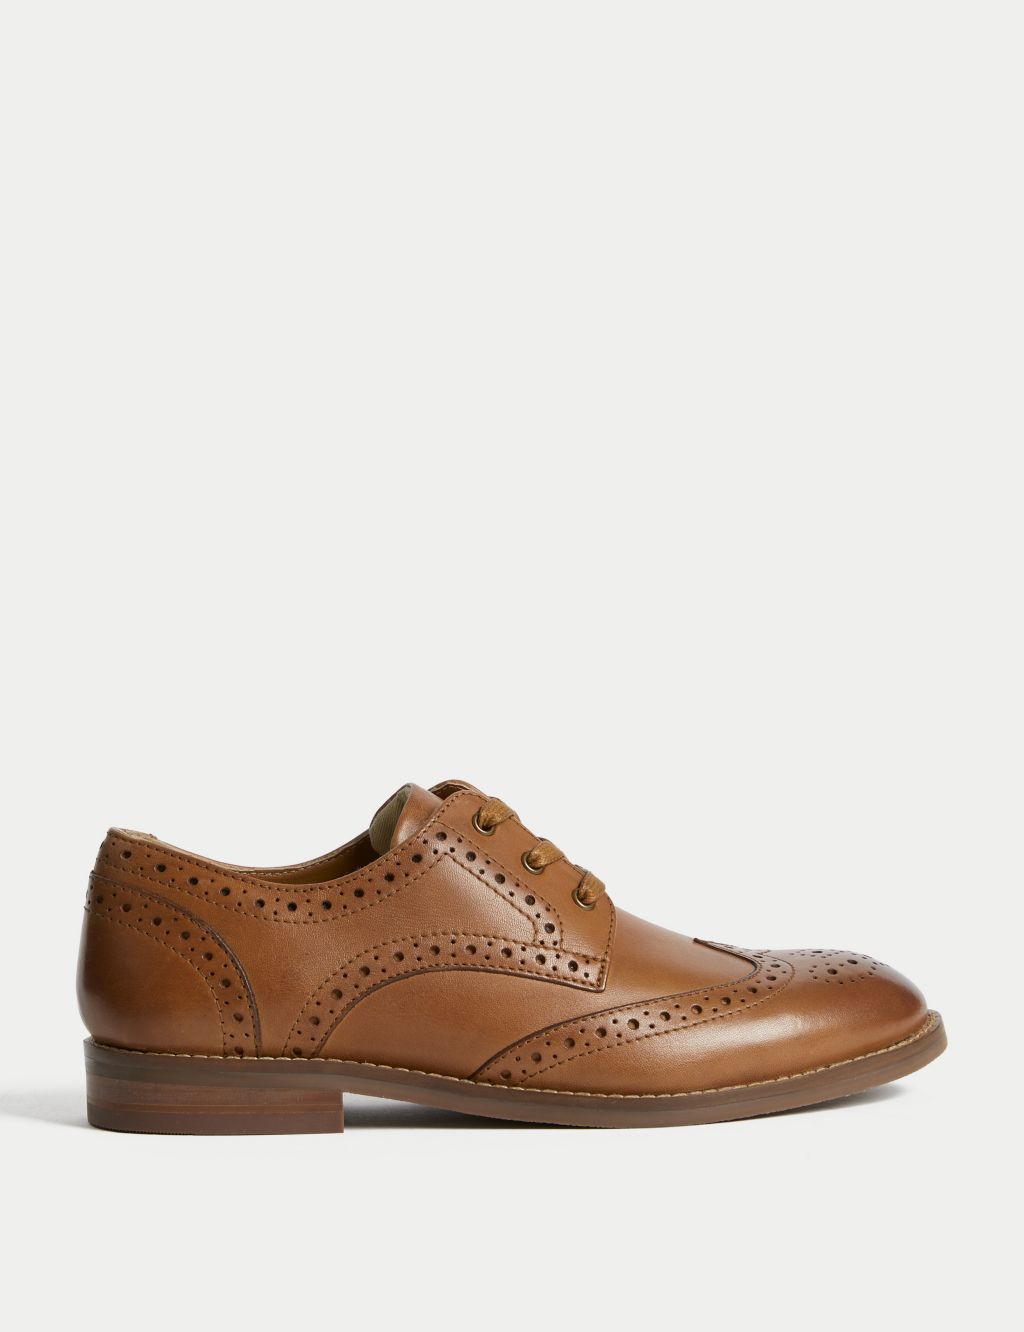 Kids' Leather Brogues (3 Large - 7 Large) image 1